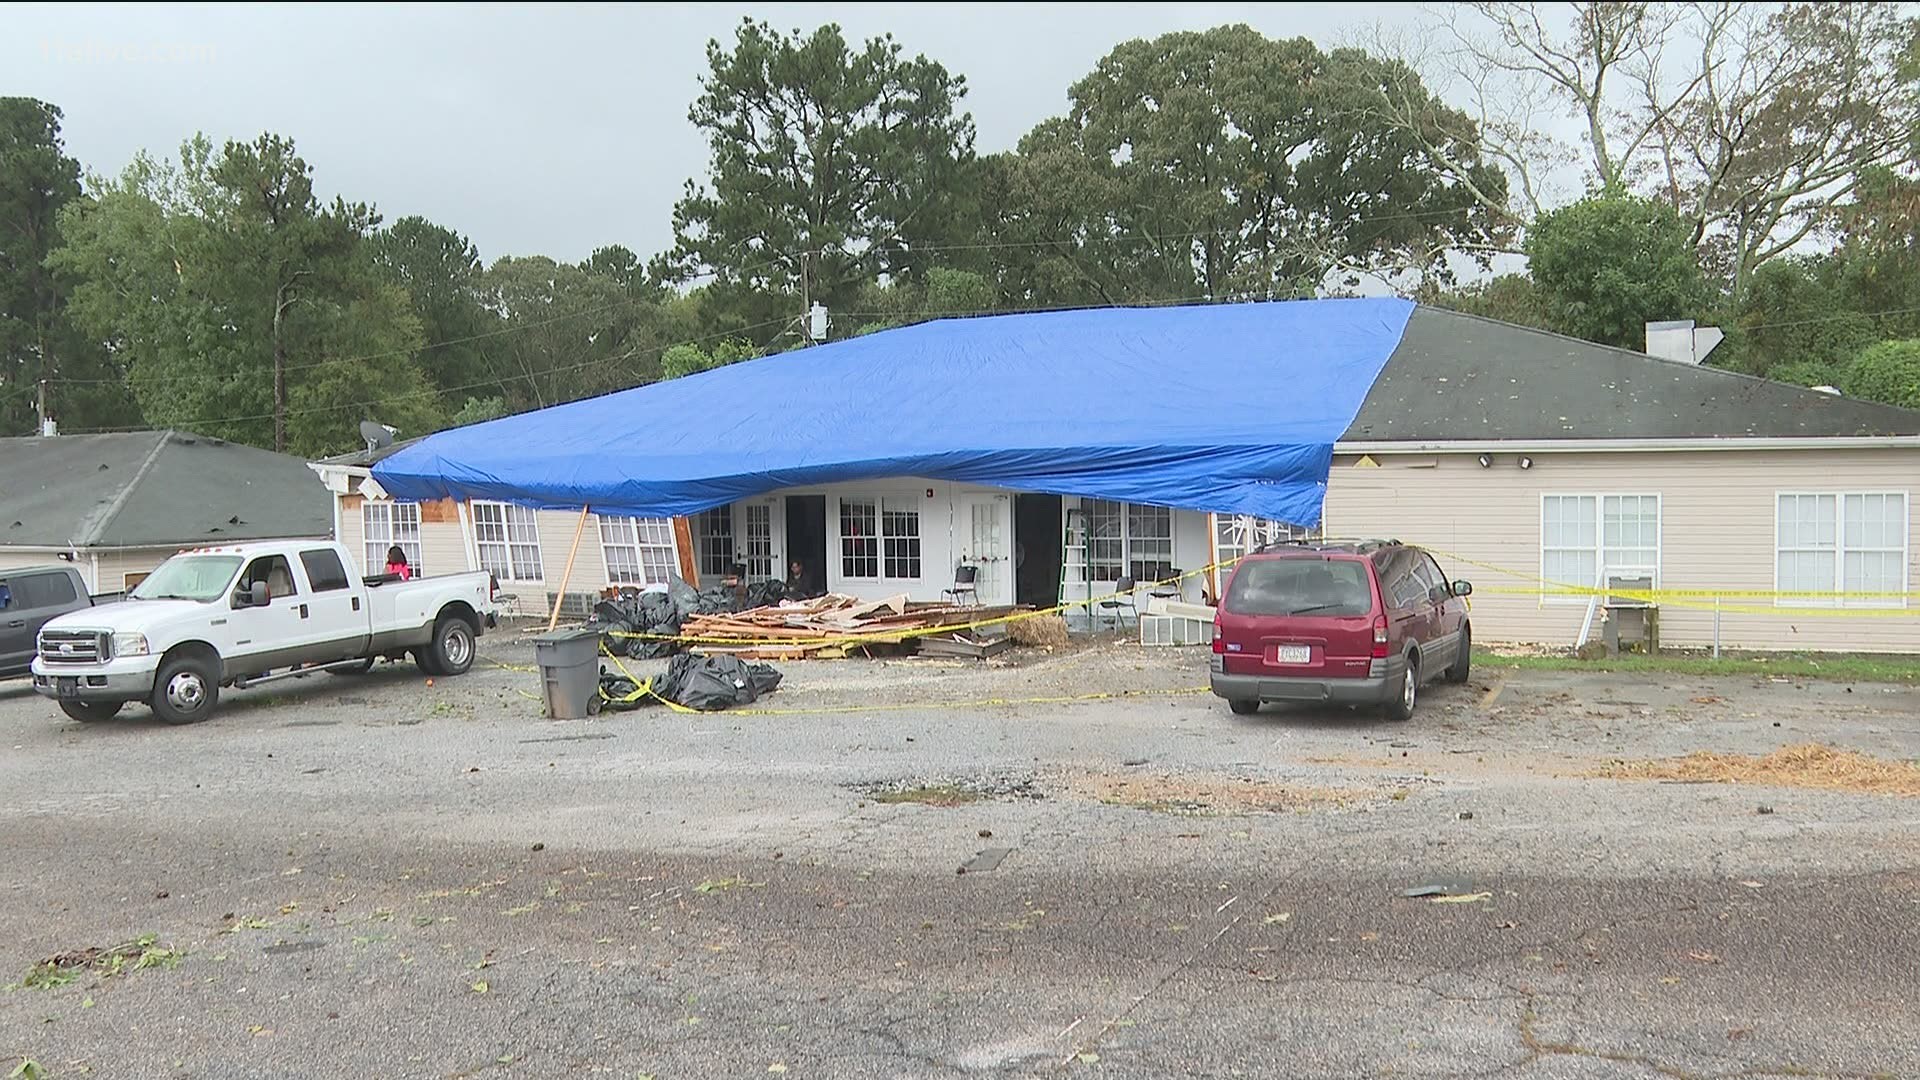 The shelter was only a short distance from a tornado that touched down in Newton County amid storms across the region.